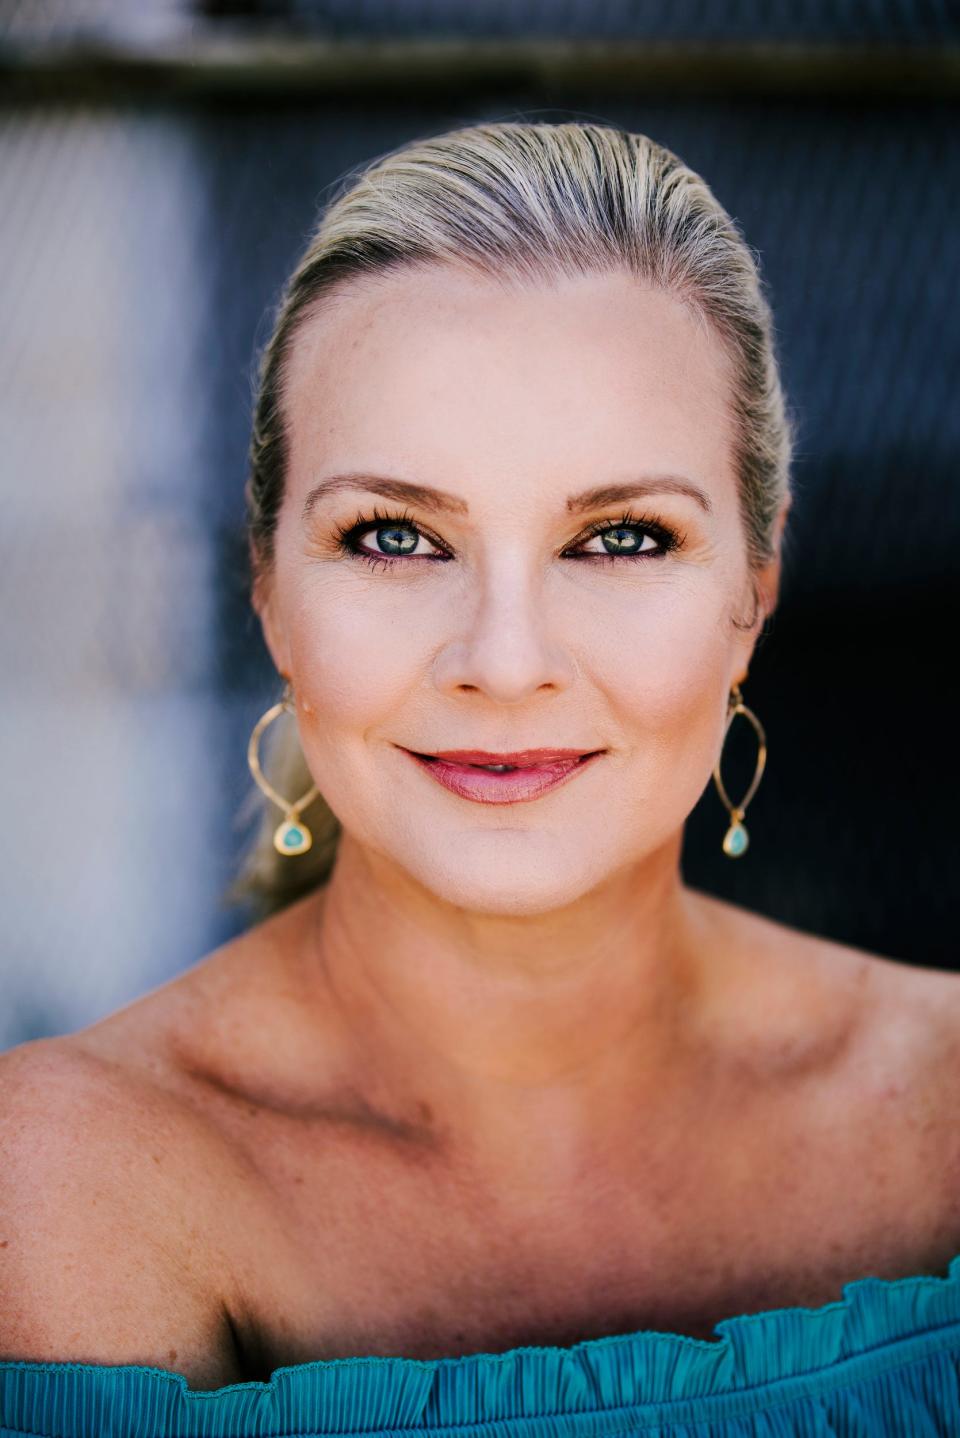 Laura Pinner of Lakeland is shown during her days of working as a model and actress in Los Angeles. Pinner was diagnosed early this year with amyotrophic lateral sclerosis, or ALS.